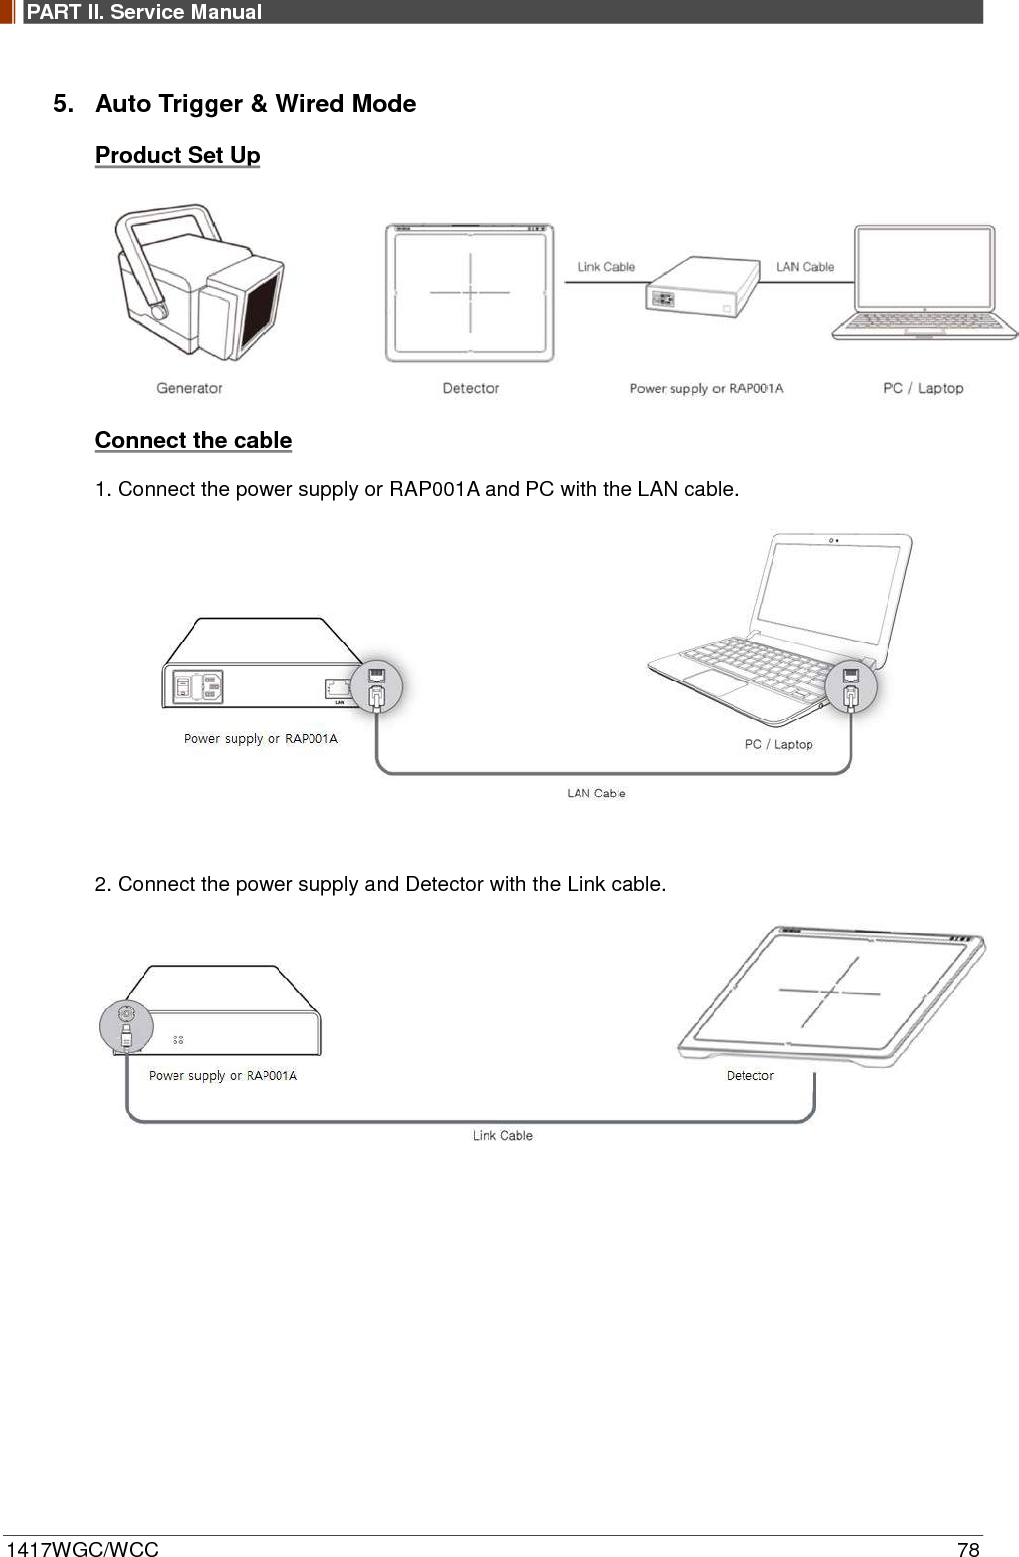 PART II. Service Manual  1417WGC/WCC 78 5. Auto Trigger &amp; Wired Mode Product Set Up  Connect the cable 1. Connect the power supply or RAP001A and PC with the LAN cable.   2. Connect the power supply and Detector with the Link cable.       